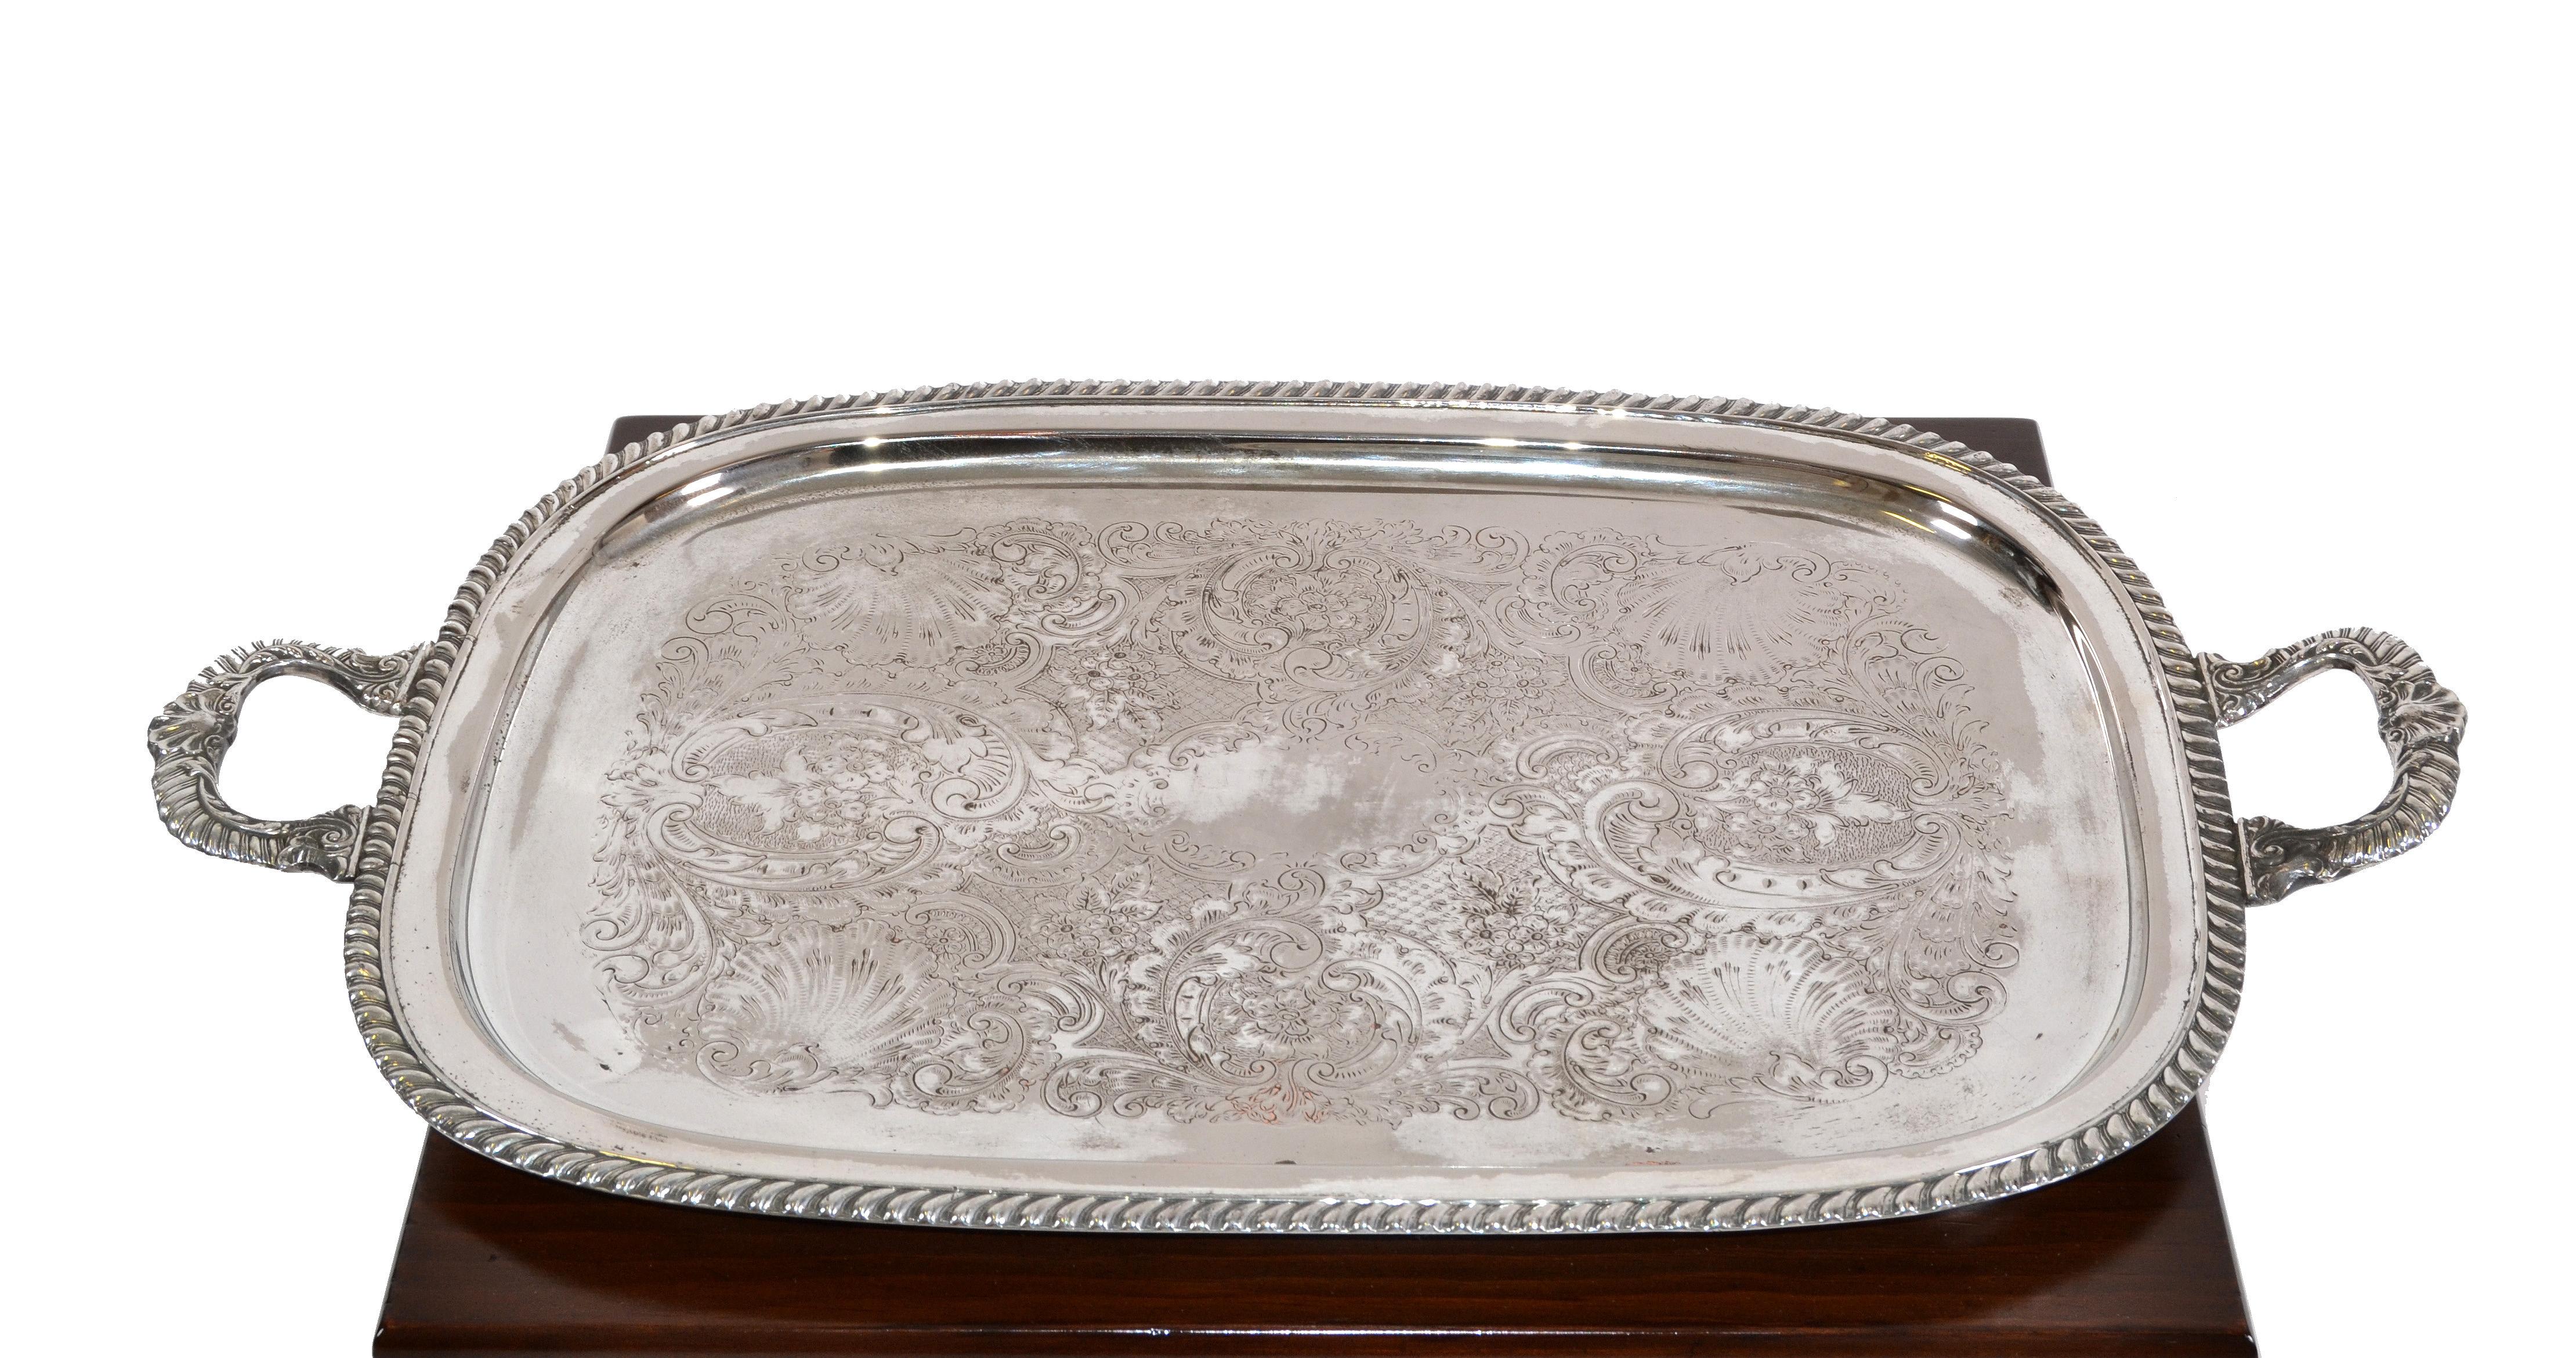 British Colonial style old English silver plate rectangular serving tray, platter with ornate handles. Scroll embossed in the Center. 
It is in original vintage condition and has some stains and is tarnished.
Measures inside tray: 20 x 14.75 x 1.75